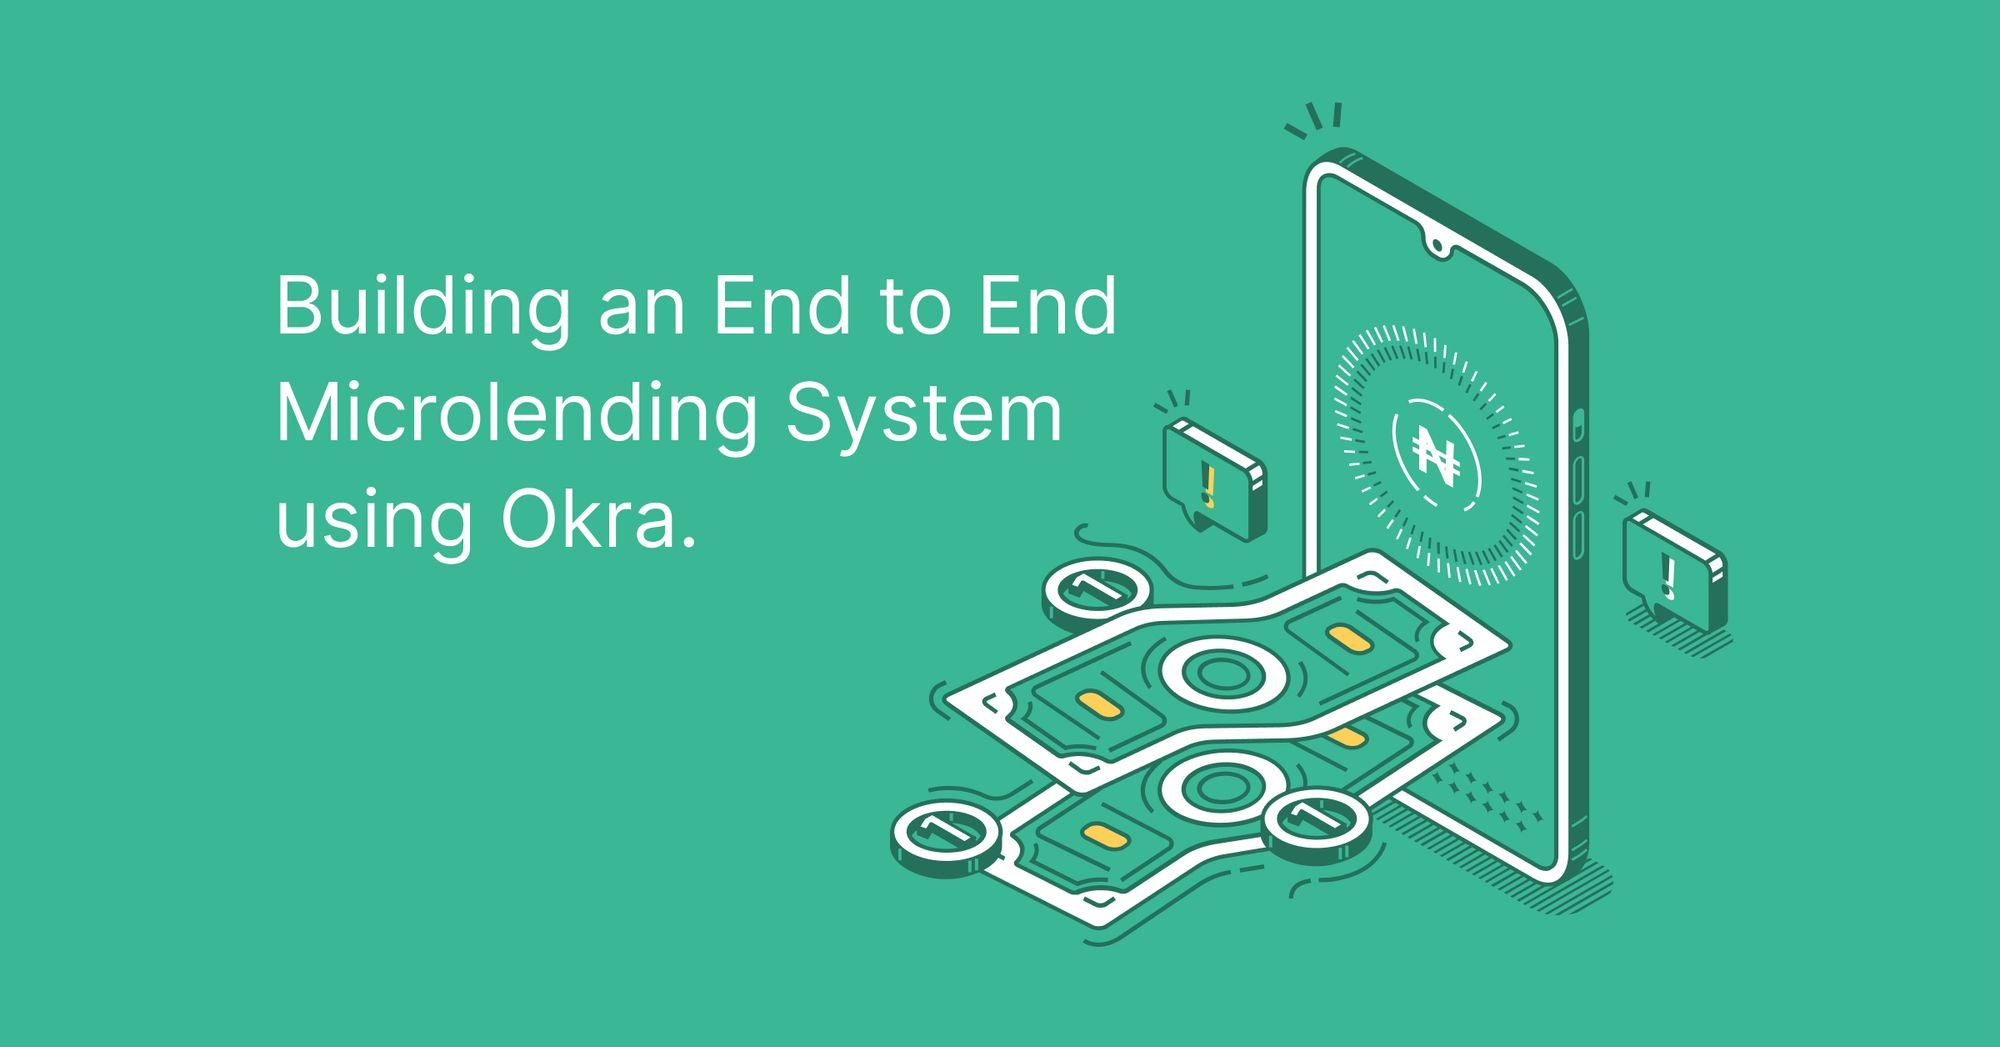 Building an End to End Microlending System using Okra